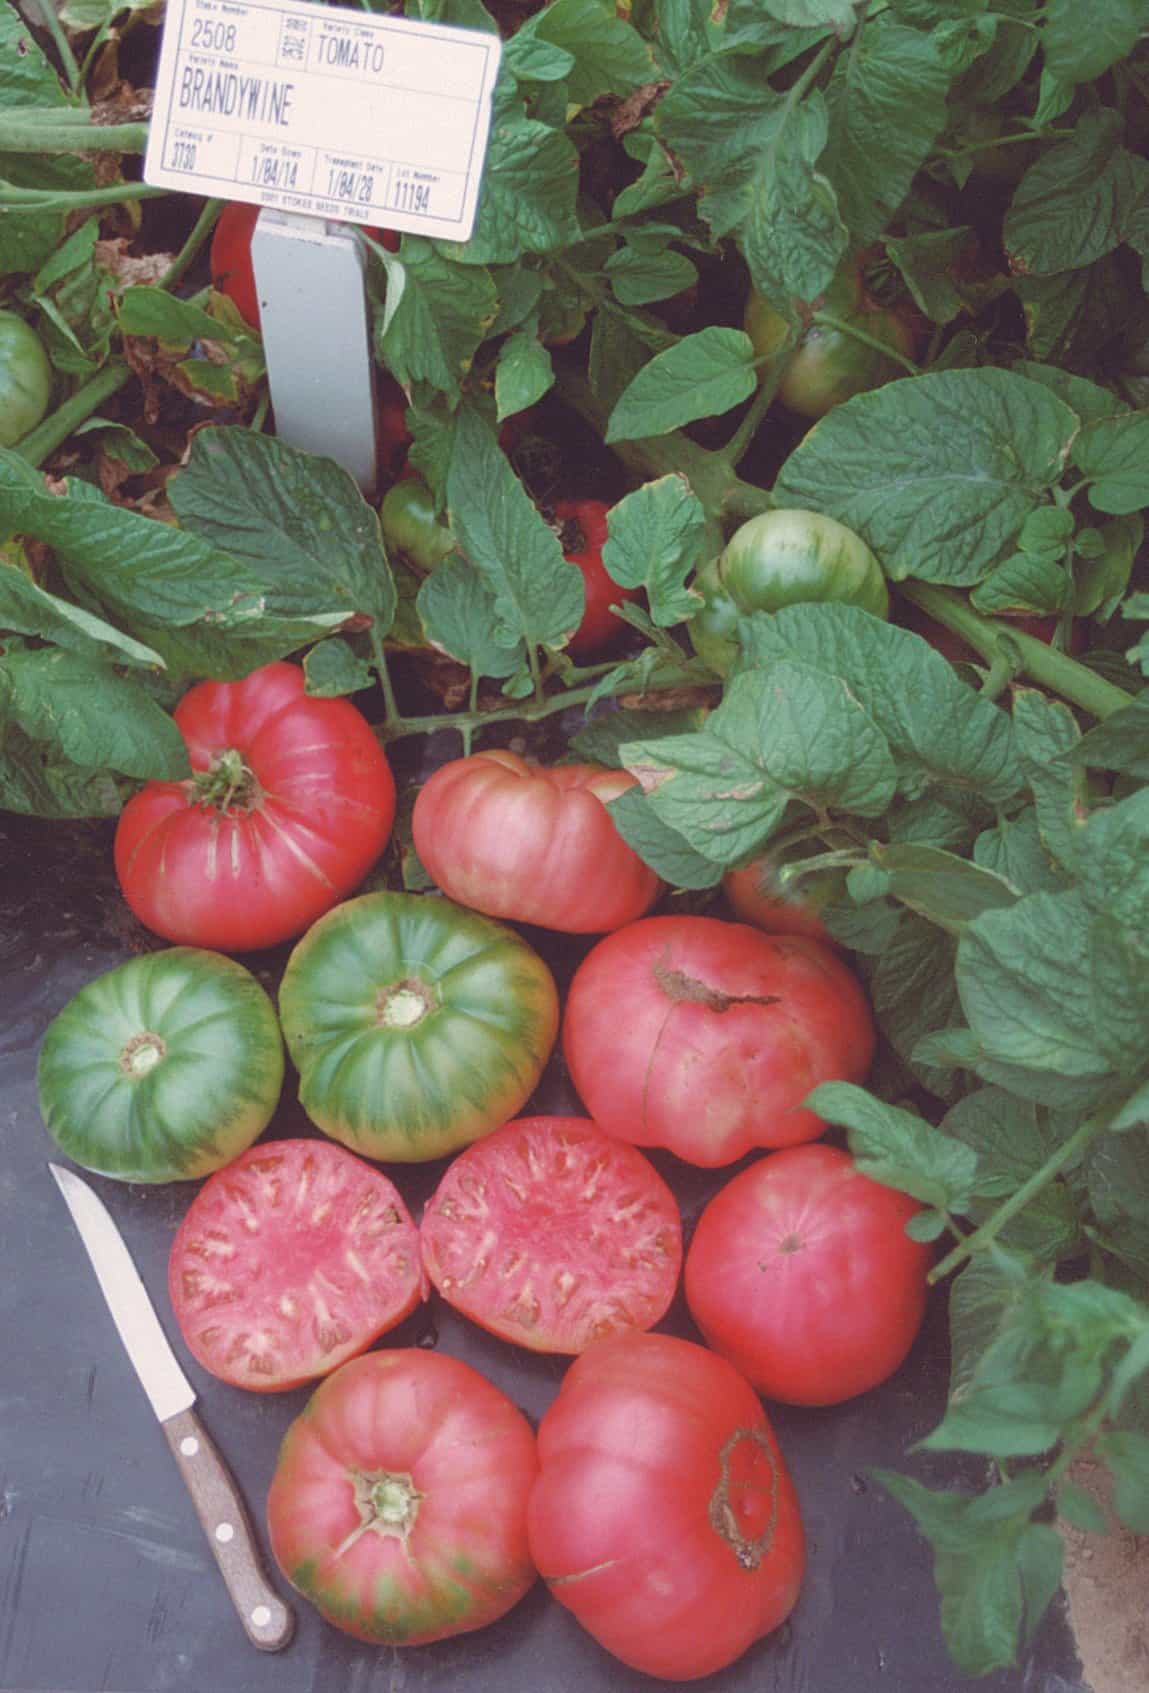 'Brandywine' tomatoes, looking ready to bite into. Photo from Stokes Seeds